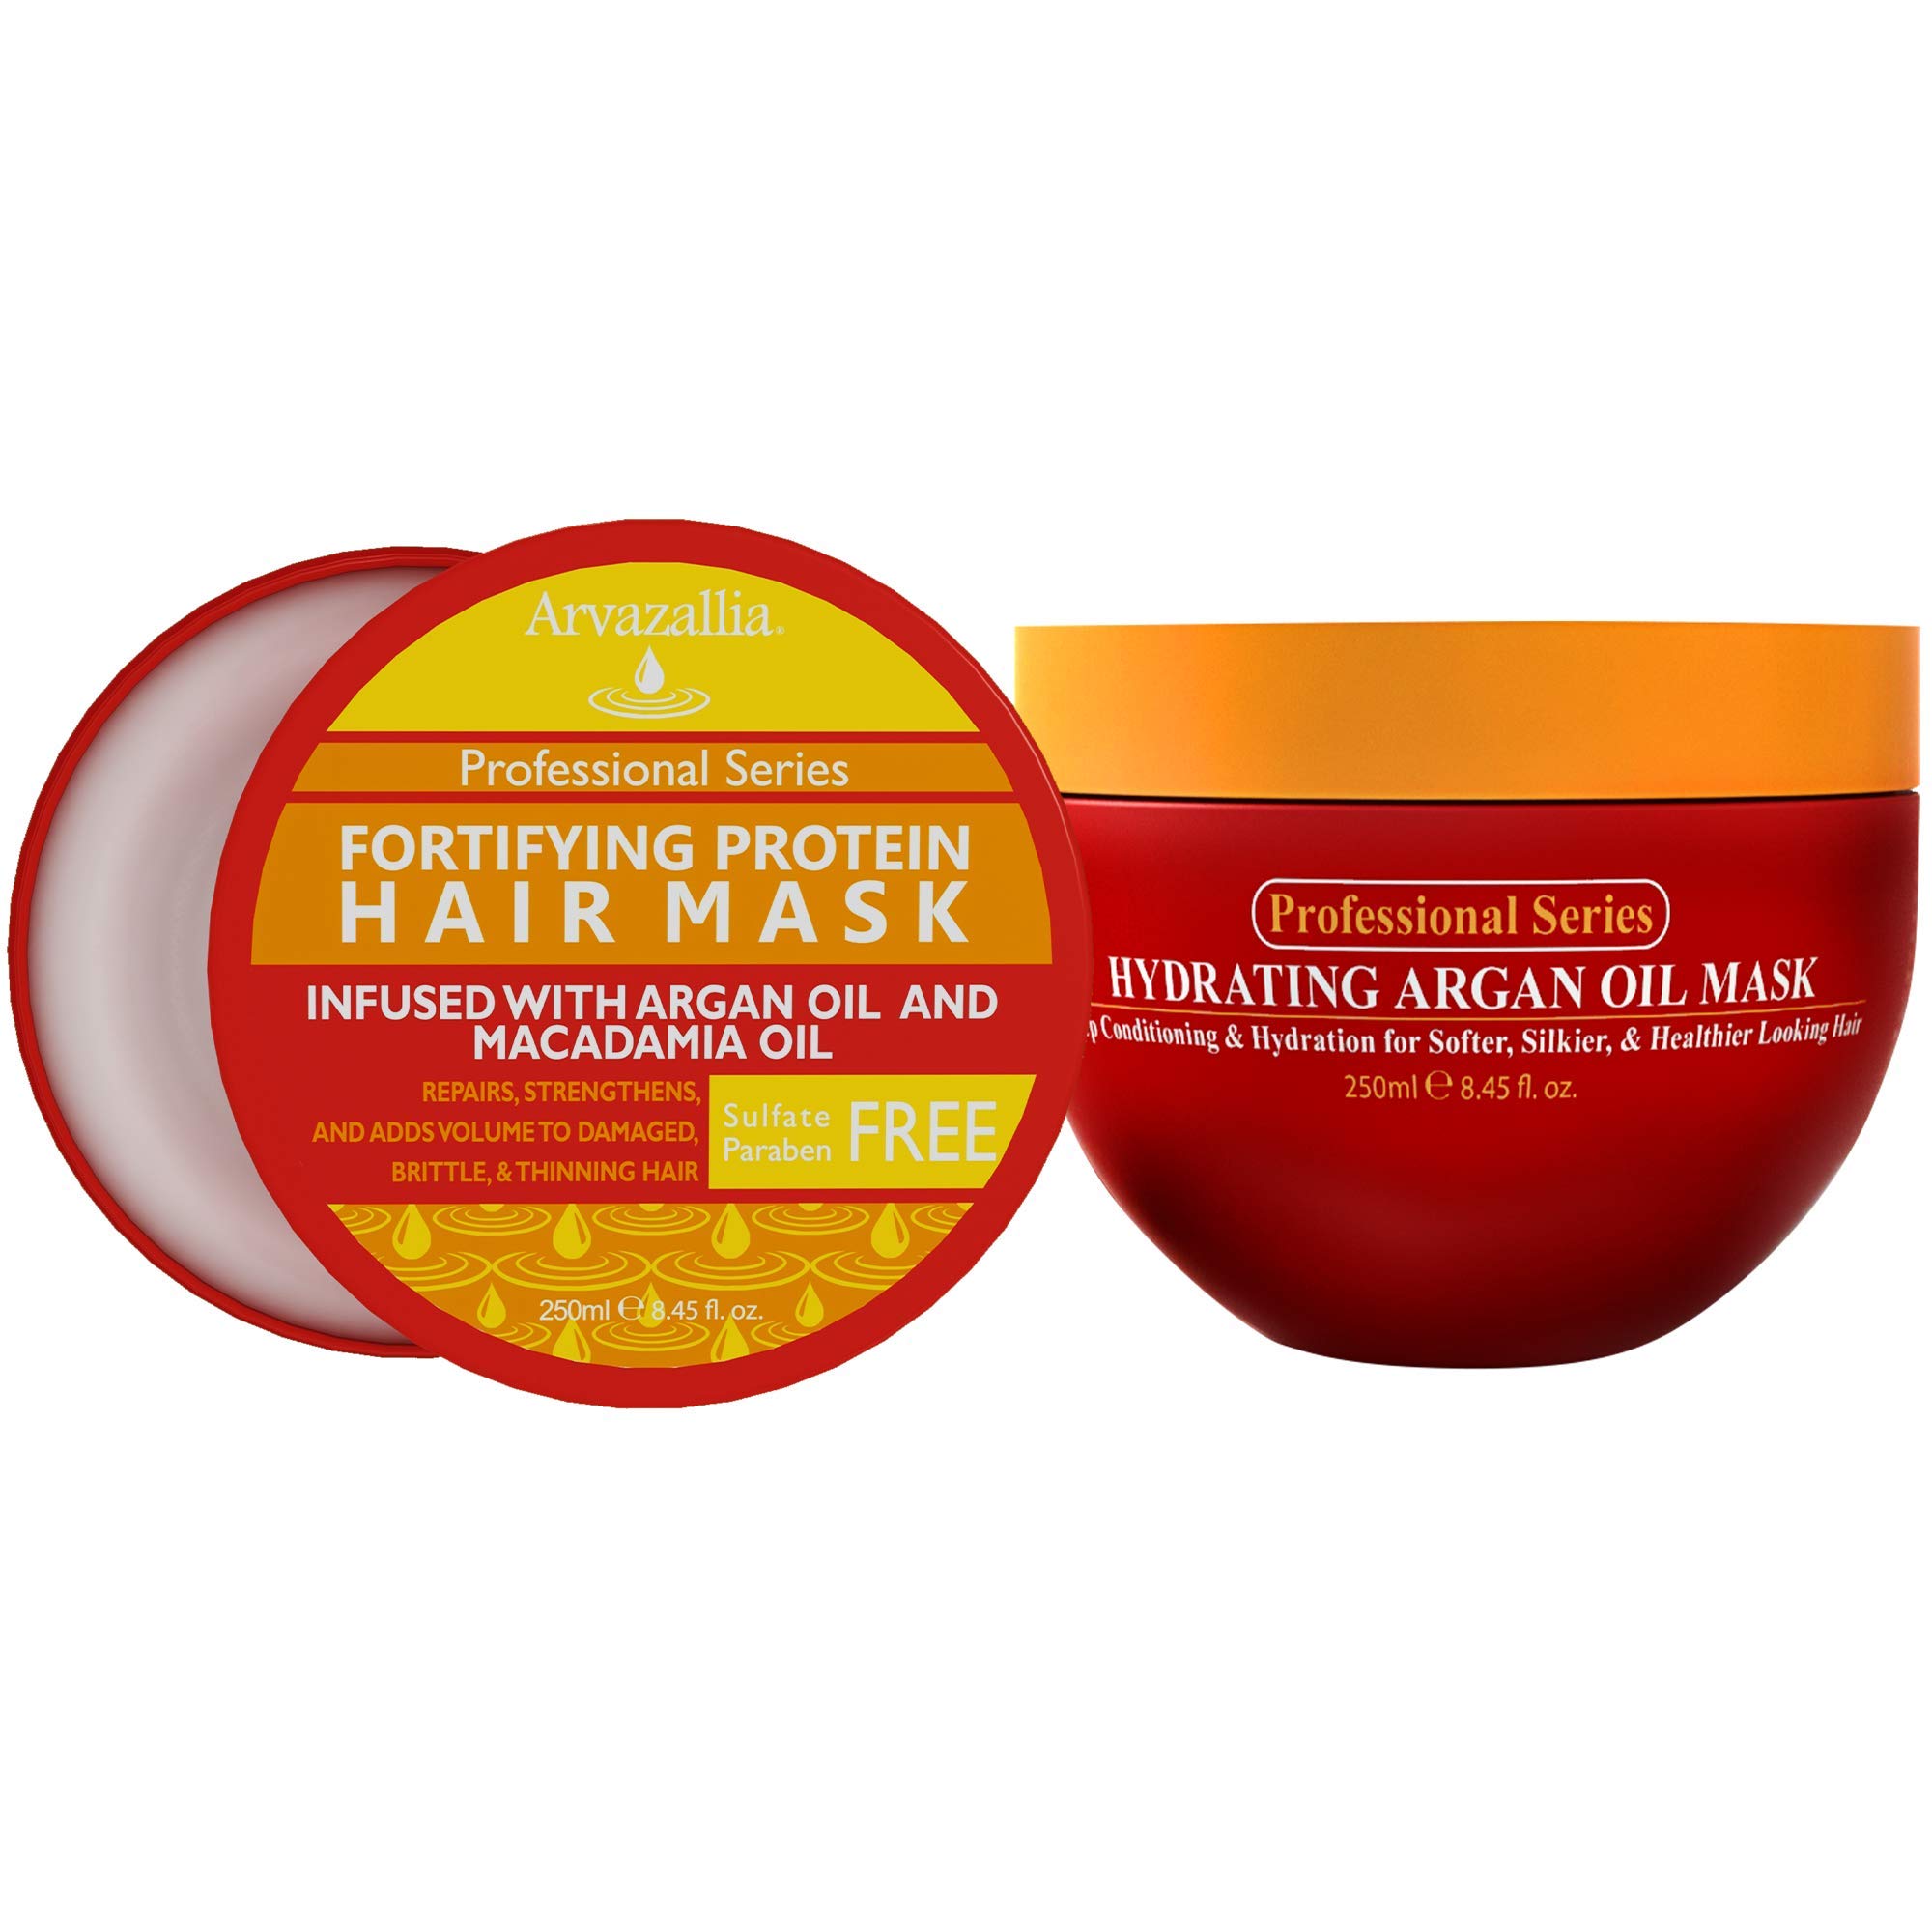 Arvazallia Hydrating Argan Oil Hair Mask and Fortifying Protein Hair Mask Bundle - The Best Hair Mask Combo for Dry or Damaged Hair